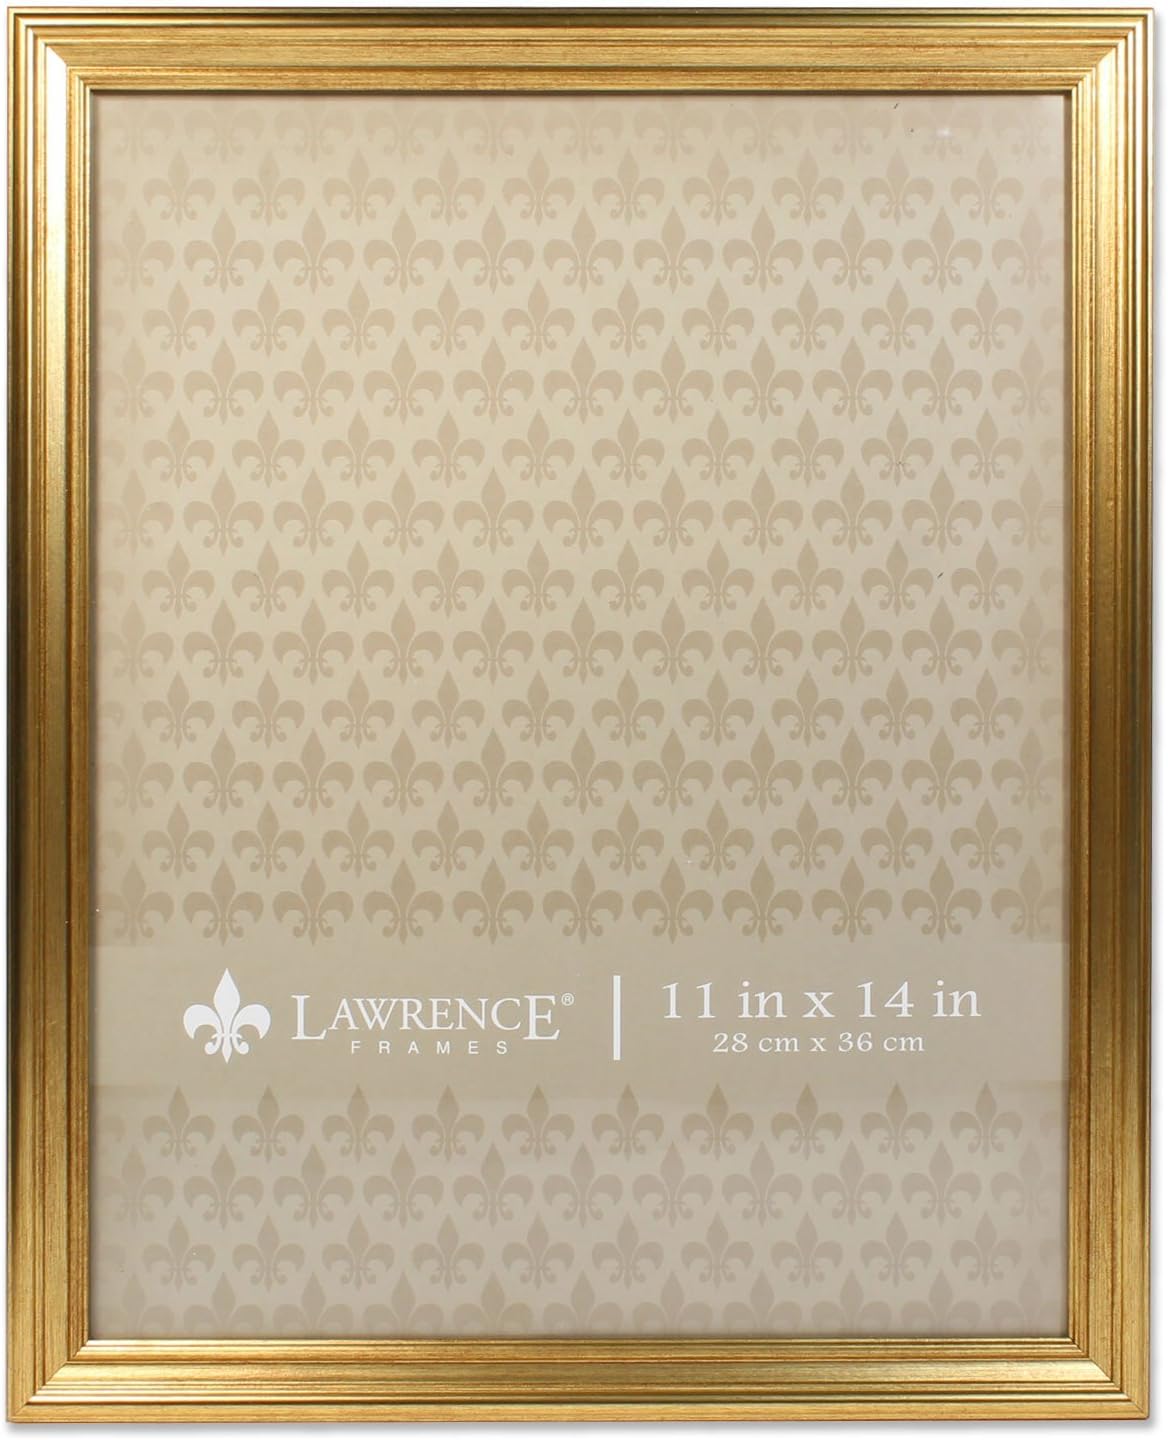 A gold frame with the word Lawrence on it, perfect for kitchen art or framed recipe display.